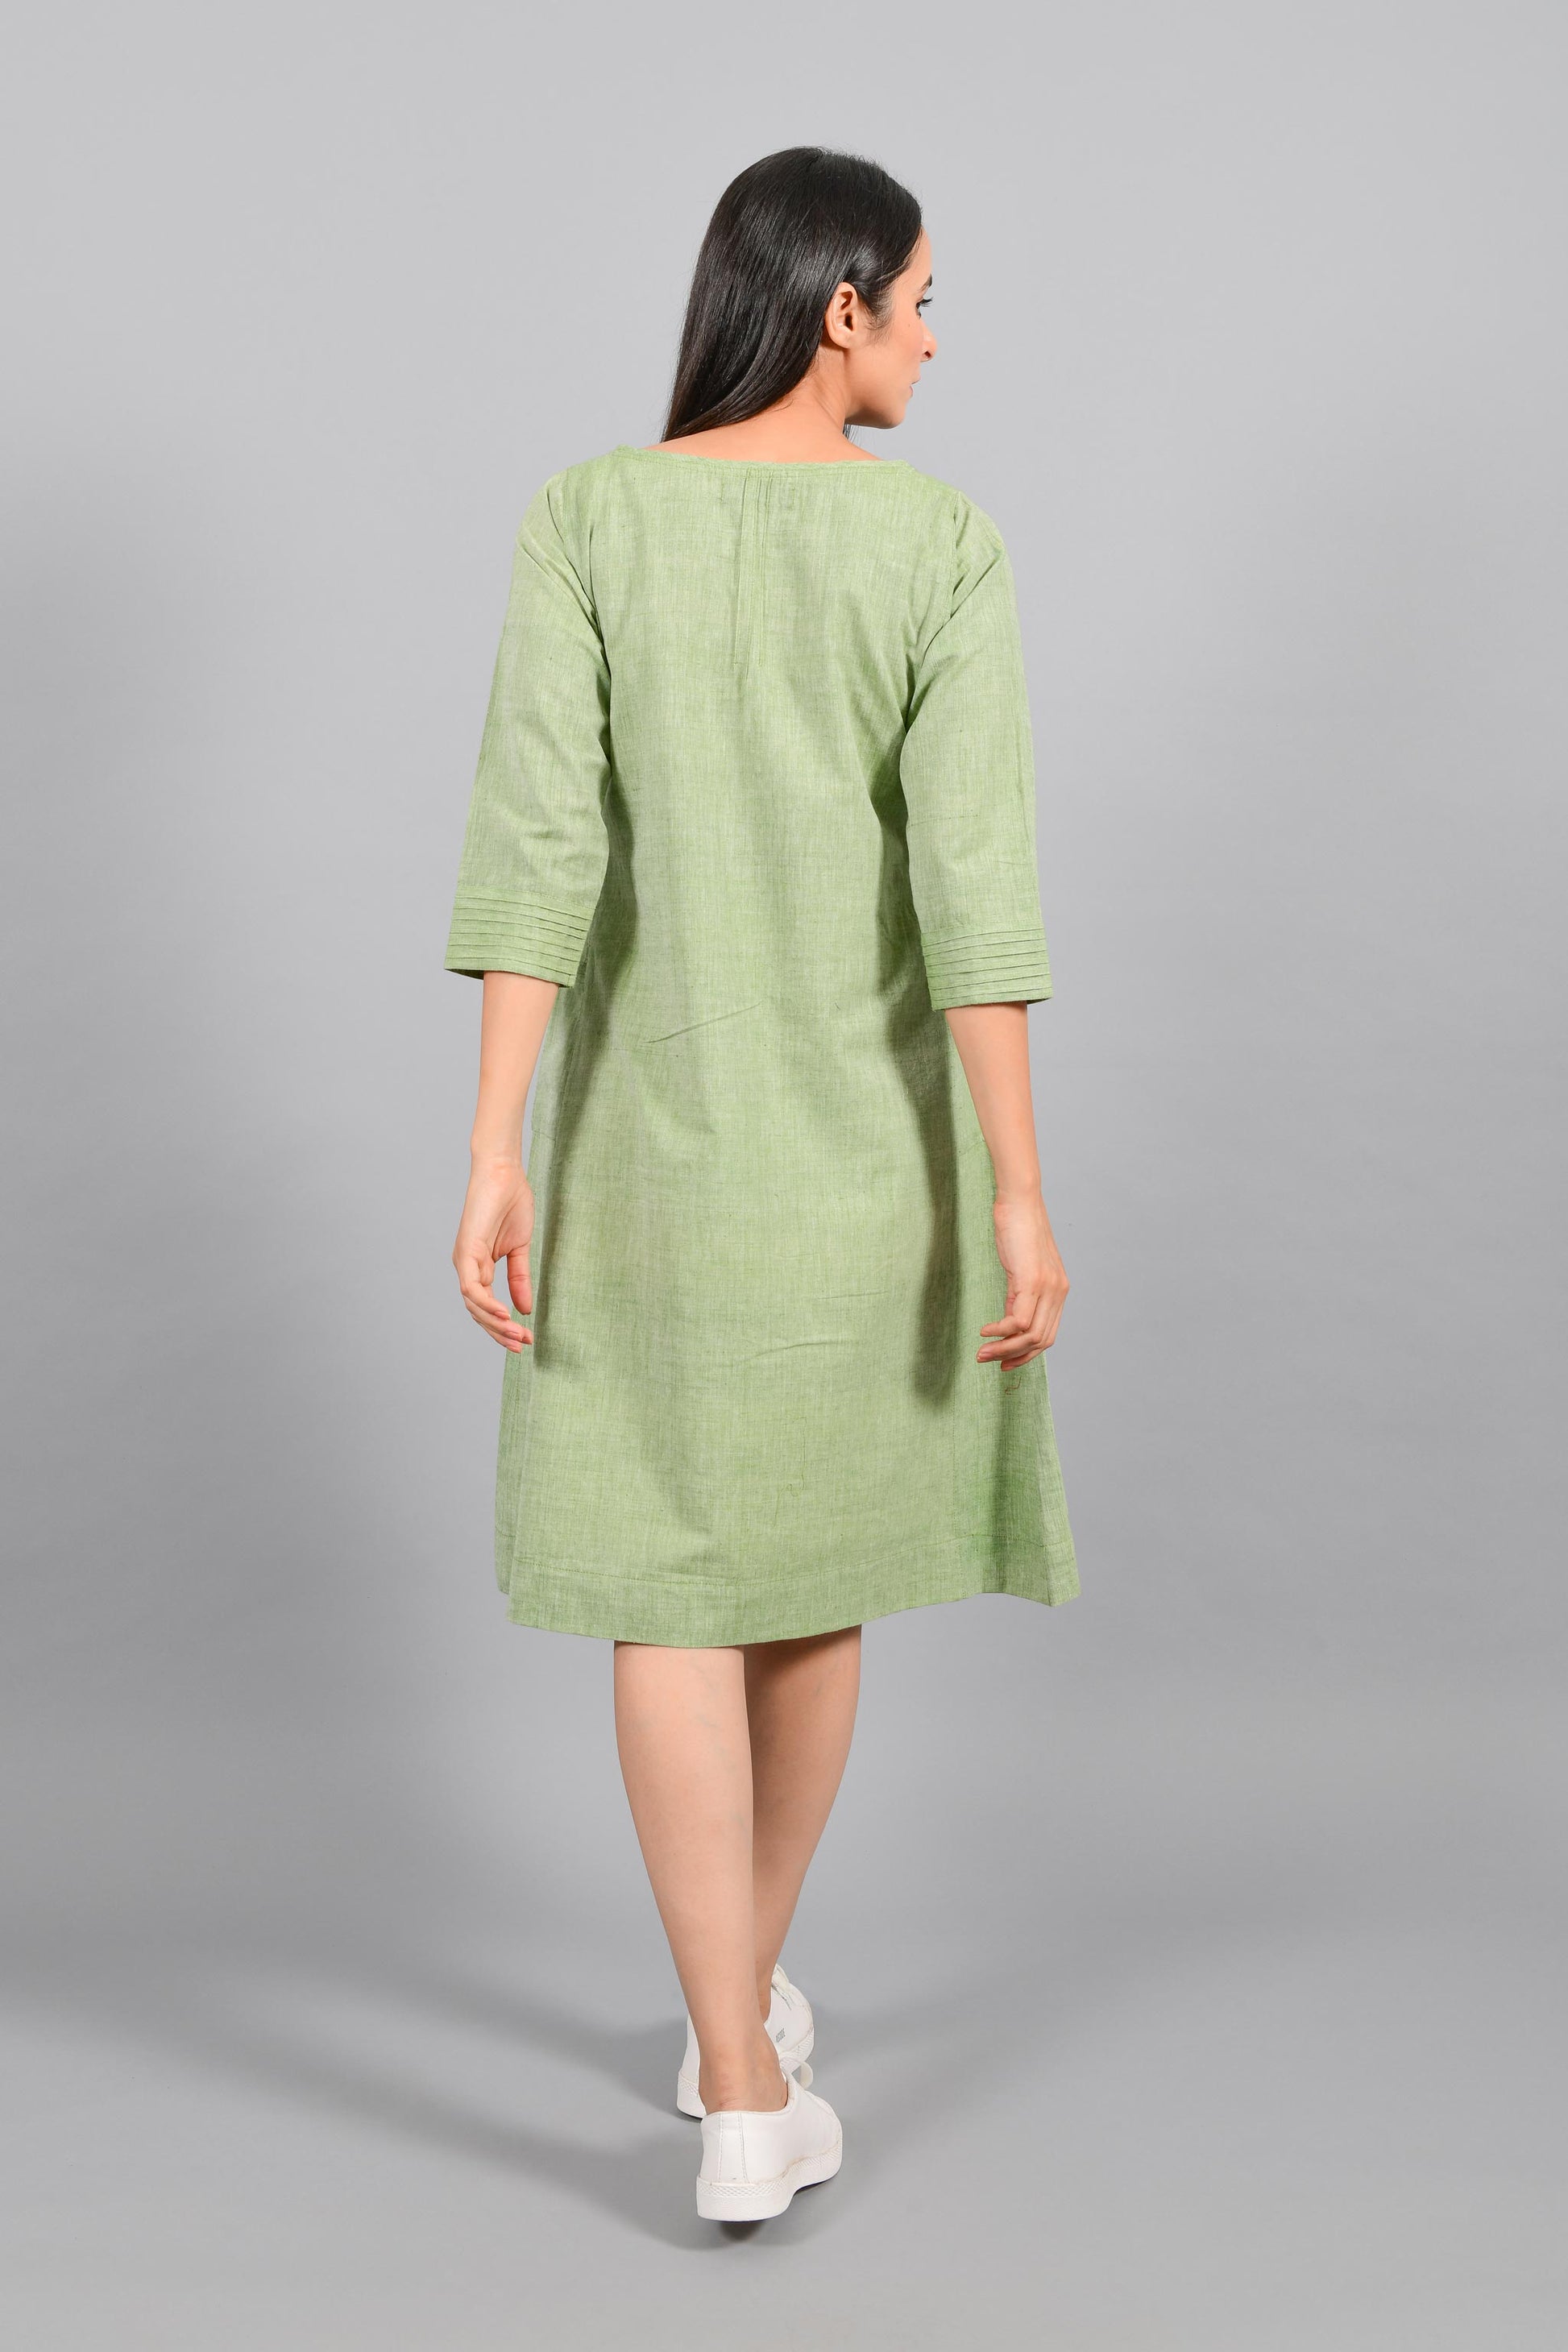 Back pose of an Indian female womenswear fashion model in a olive green chambray handspun and handwoven khadi cotton dress-kurta with pintucks on front by Cotton Rack.